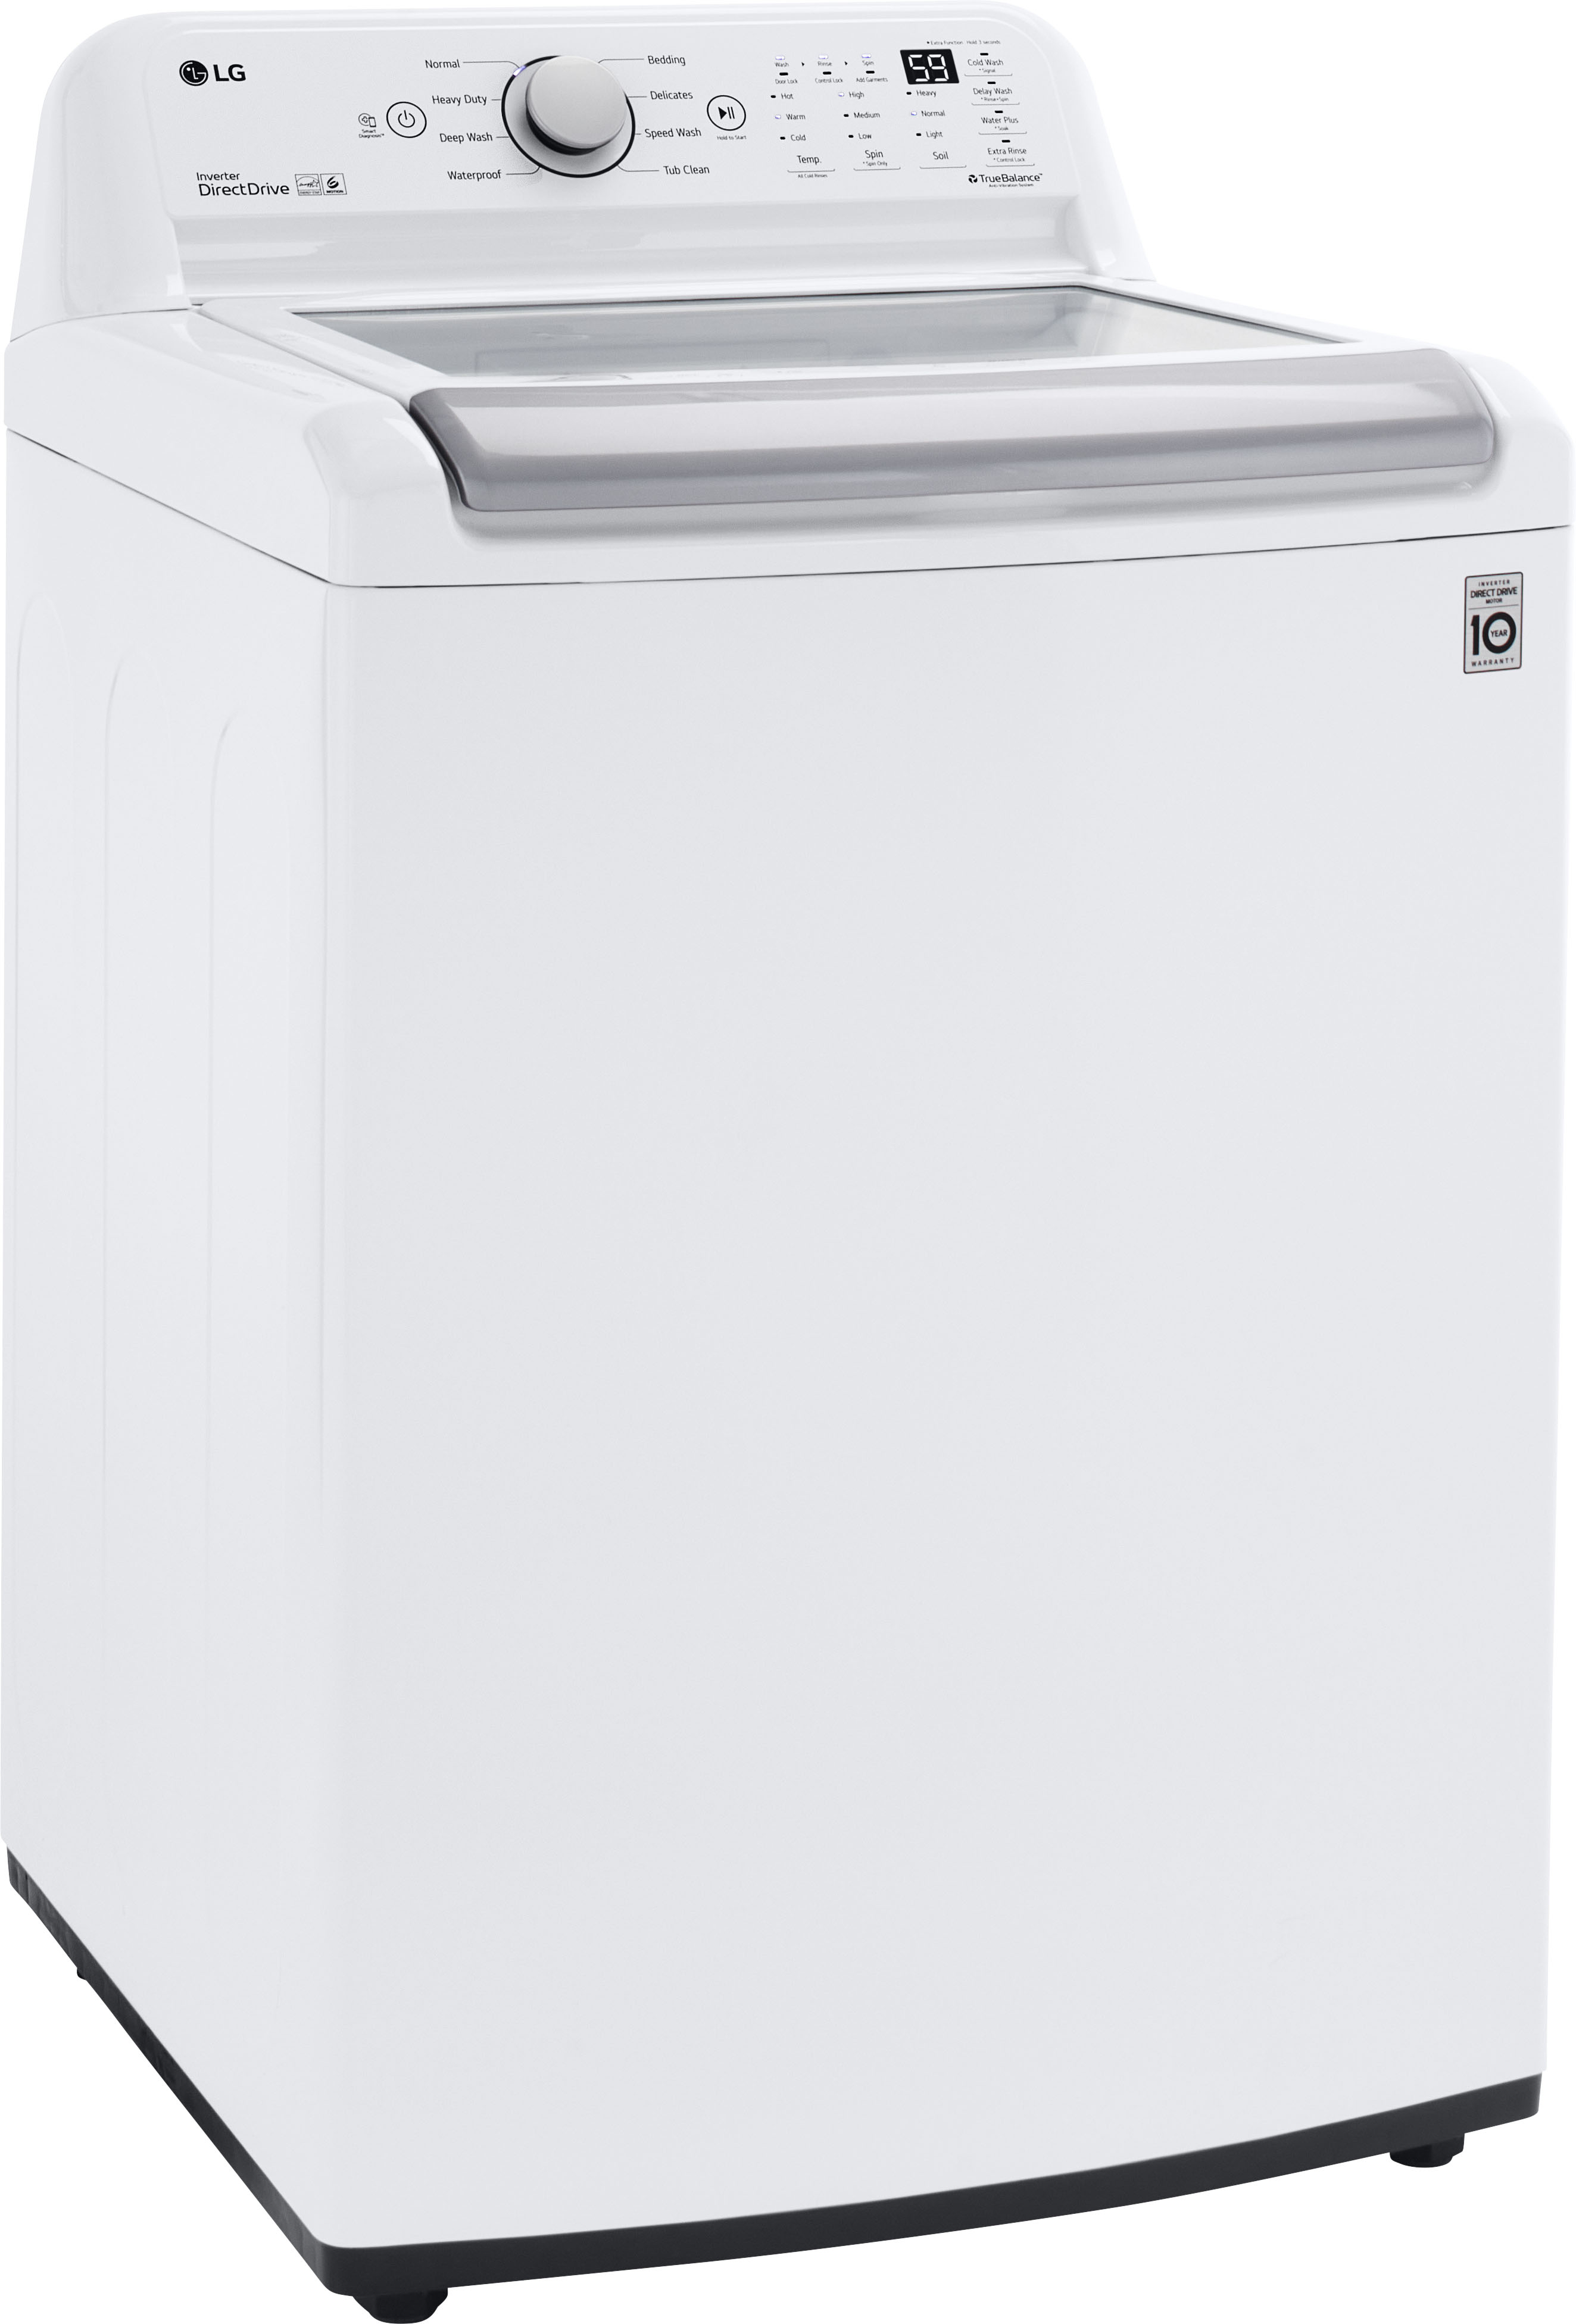 Angle View: LG - 5.0 Cu. Ft. High-Efficiency Smart Top Load Washer with 6Motion Technology - White